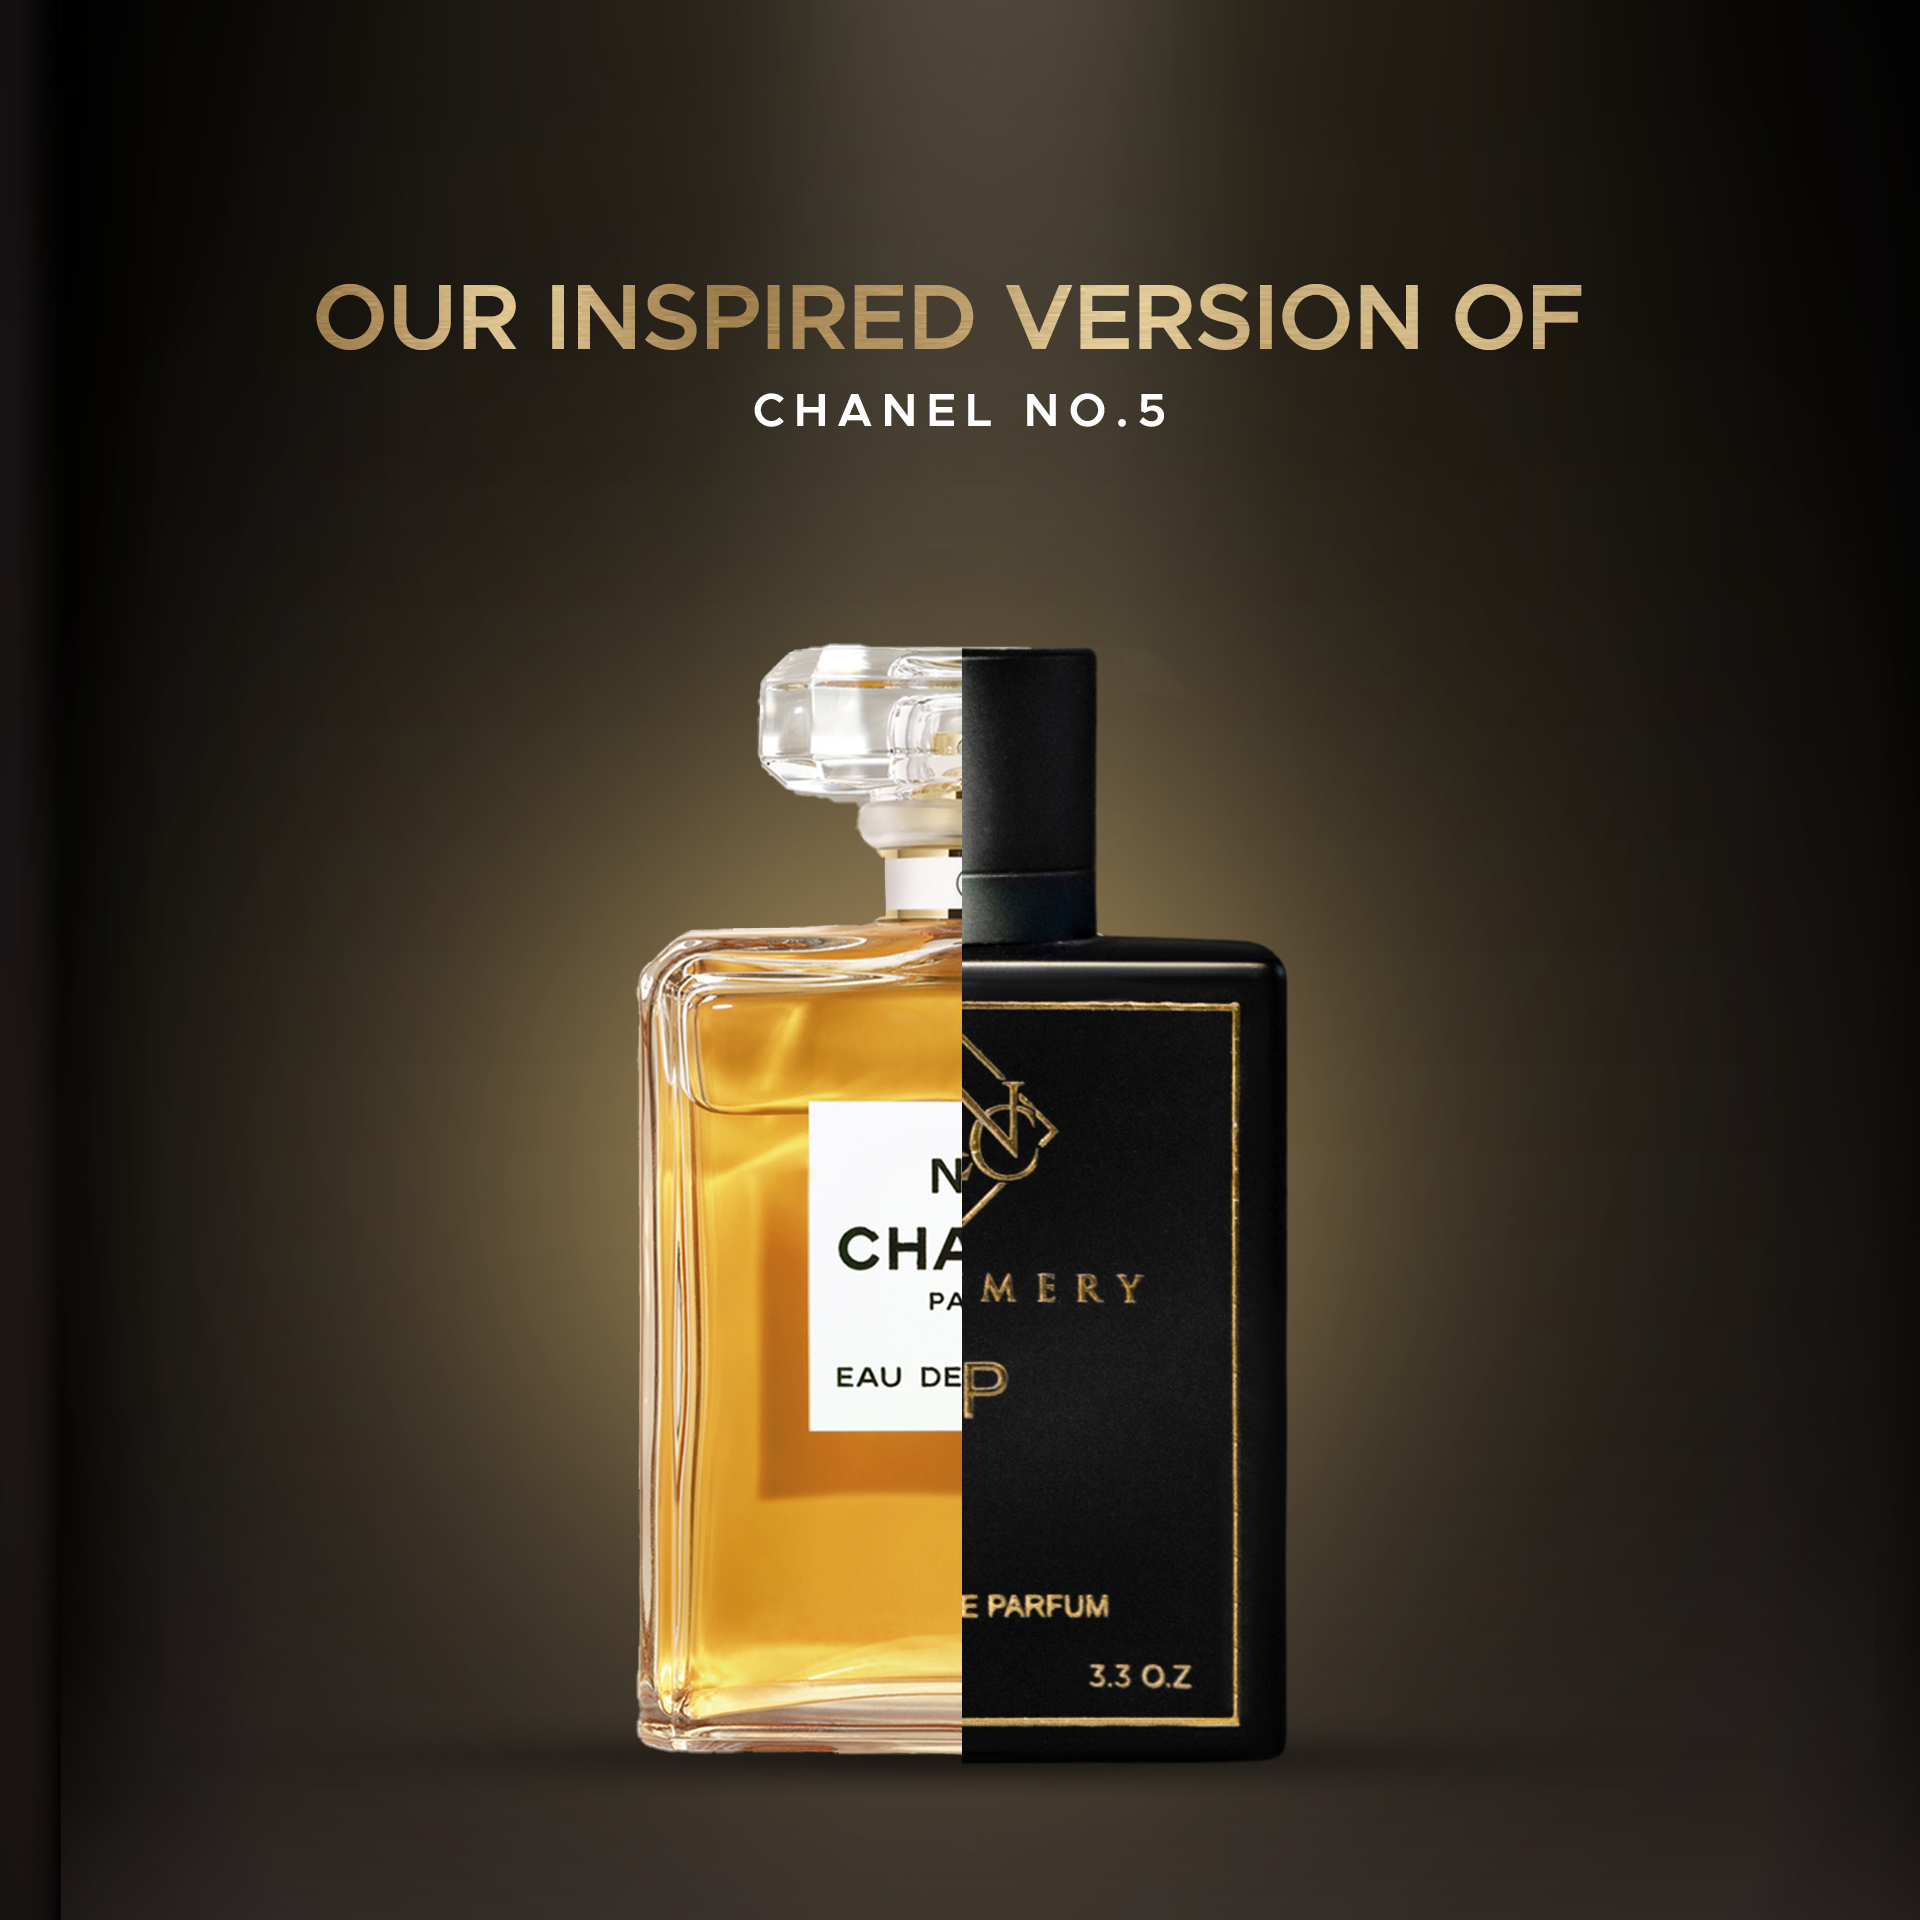 Chanel no 5, Shop Latest Inspired Perfume chanel no 5 for women and men online in india, chanel no 5 inspired perfume